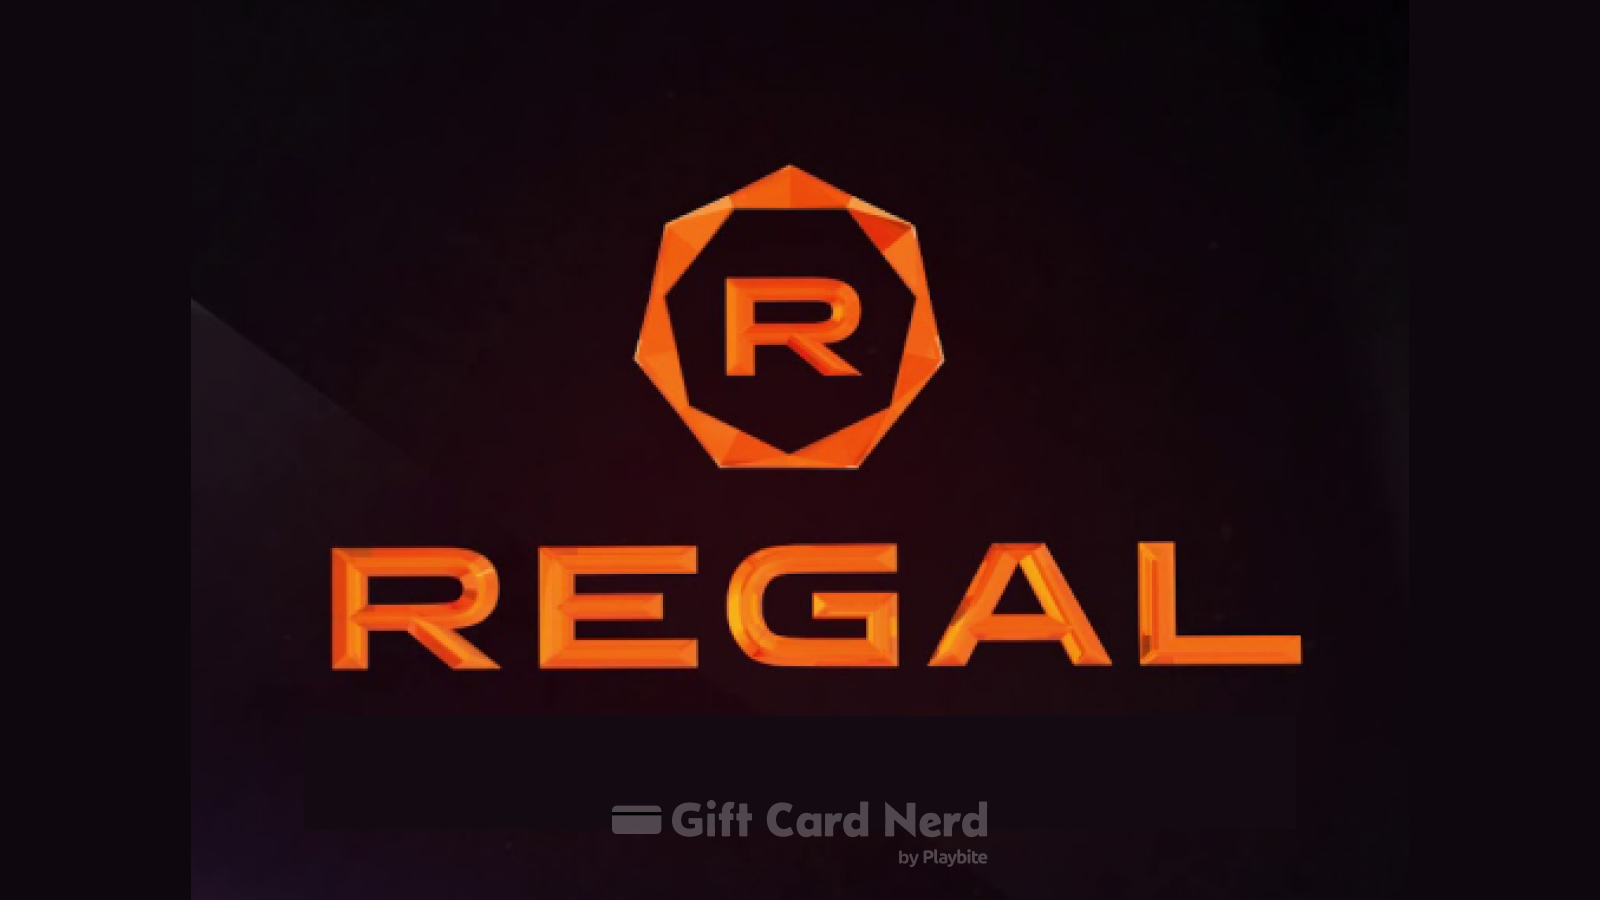 Does Walmart Sell Regal Gift Cards?